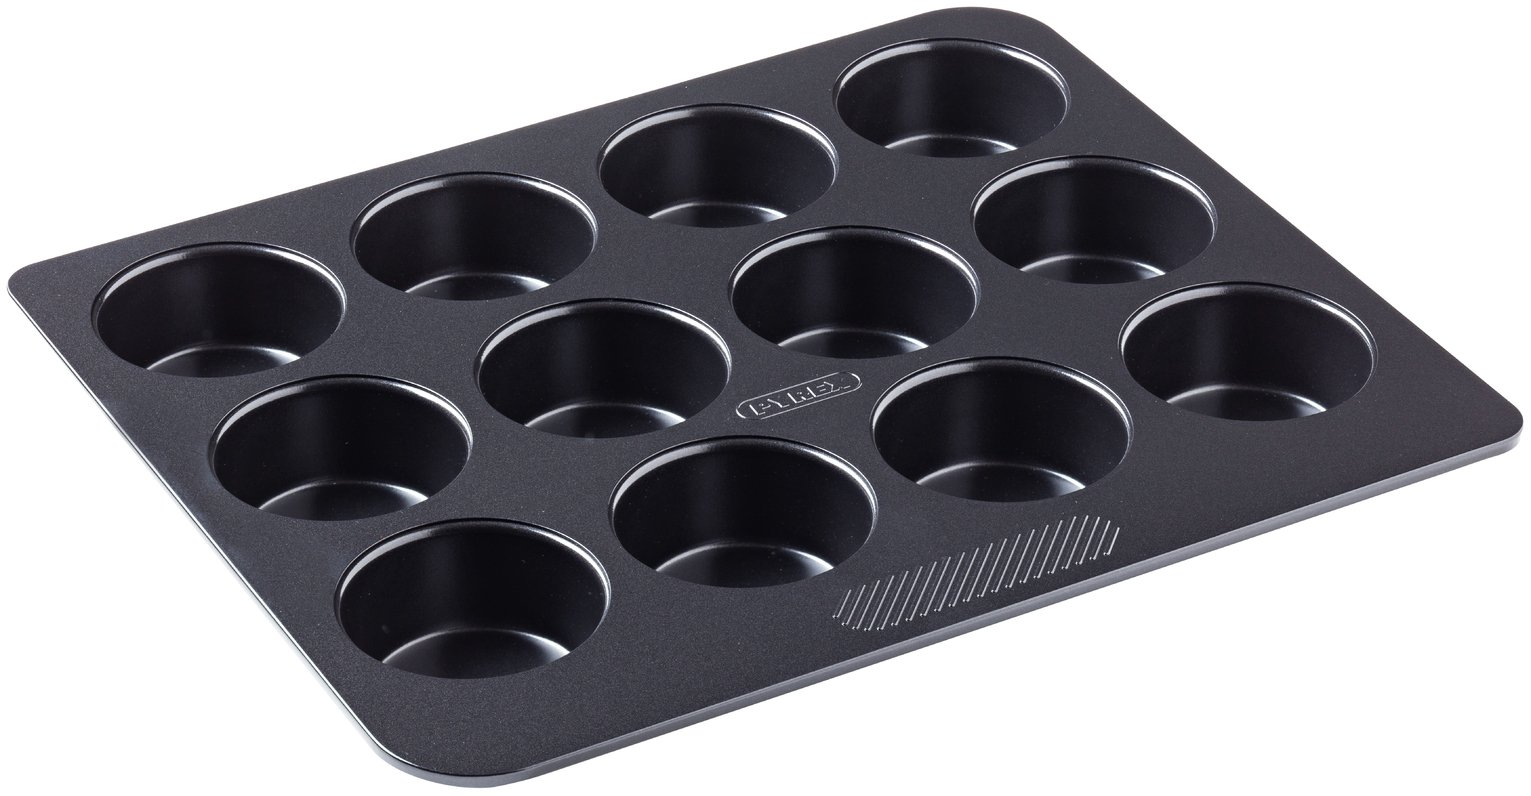 Pyrex Magic 12 Cup Muffin Tray Review